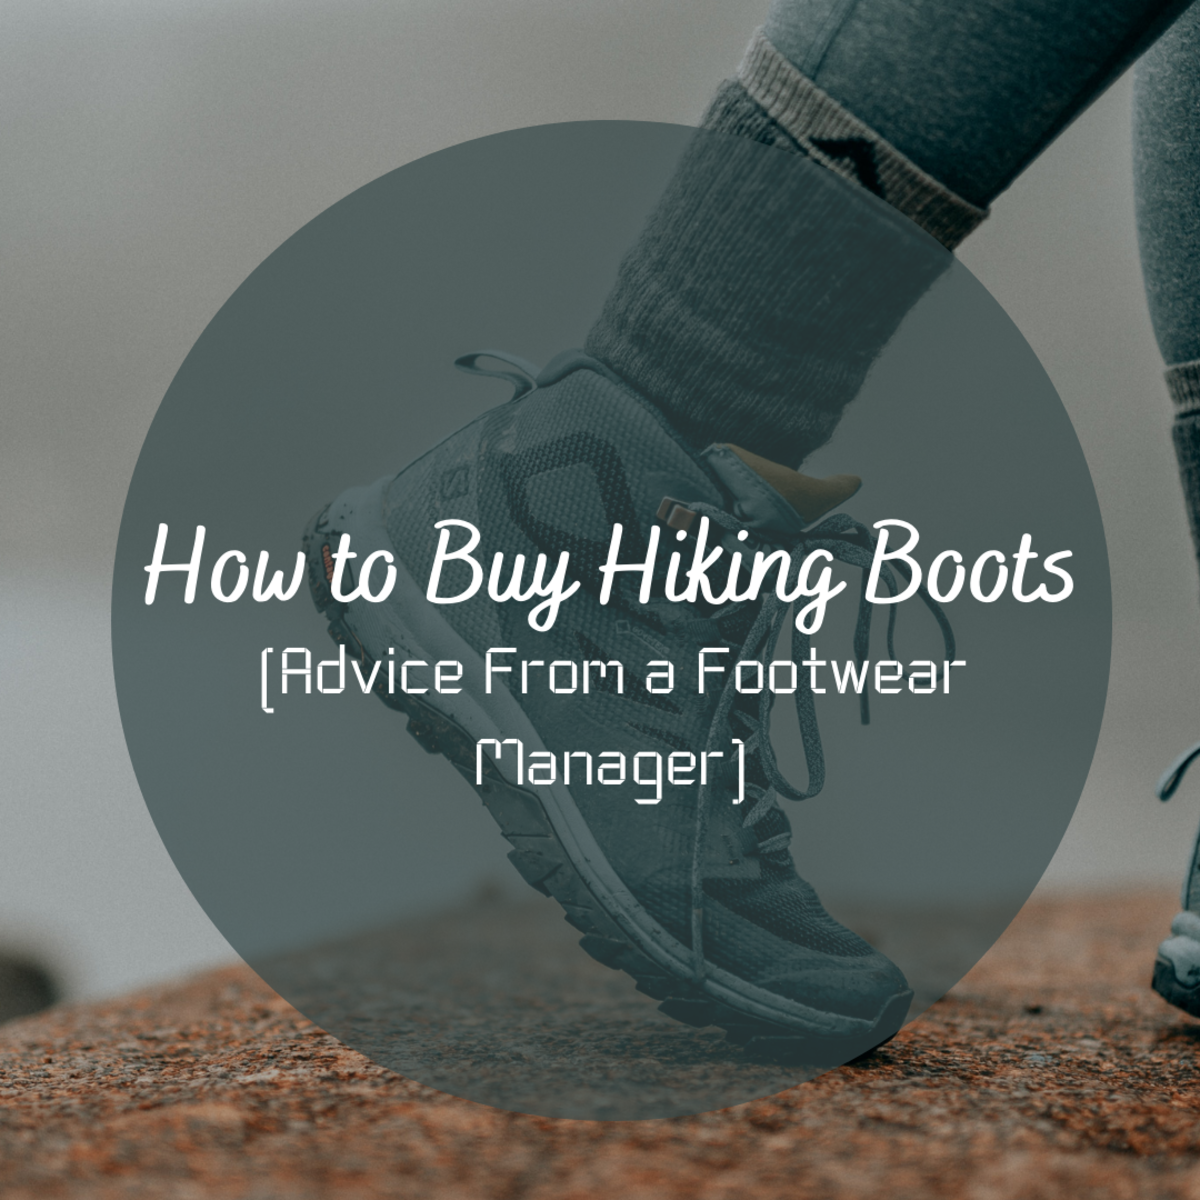 How to Buy Hiking Boots: Secrets From a Footwear Manager